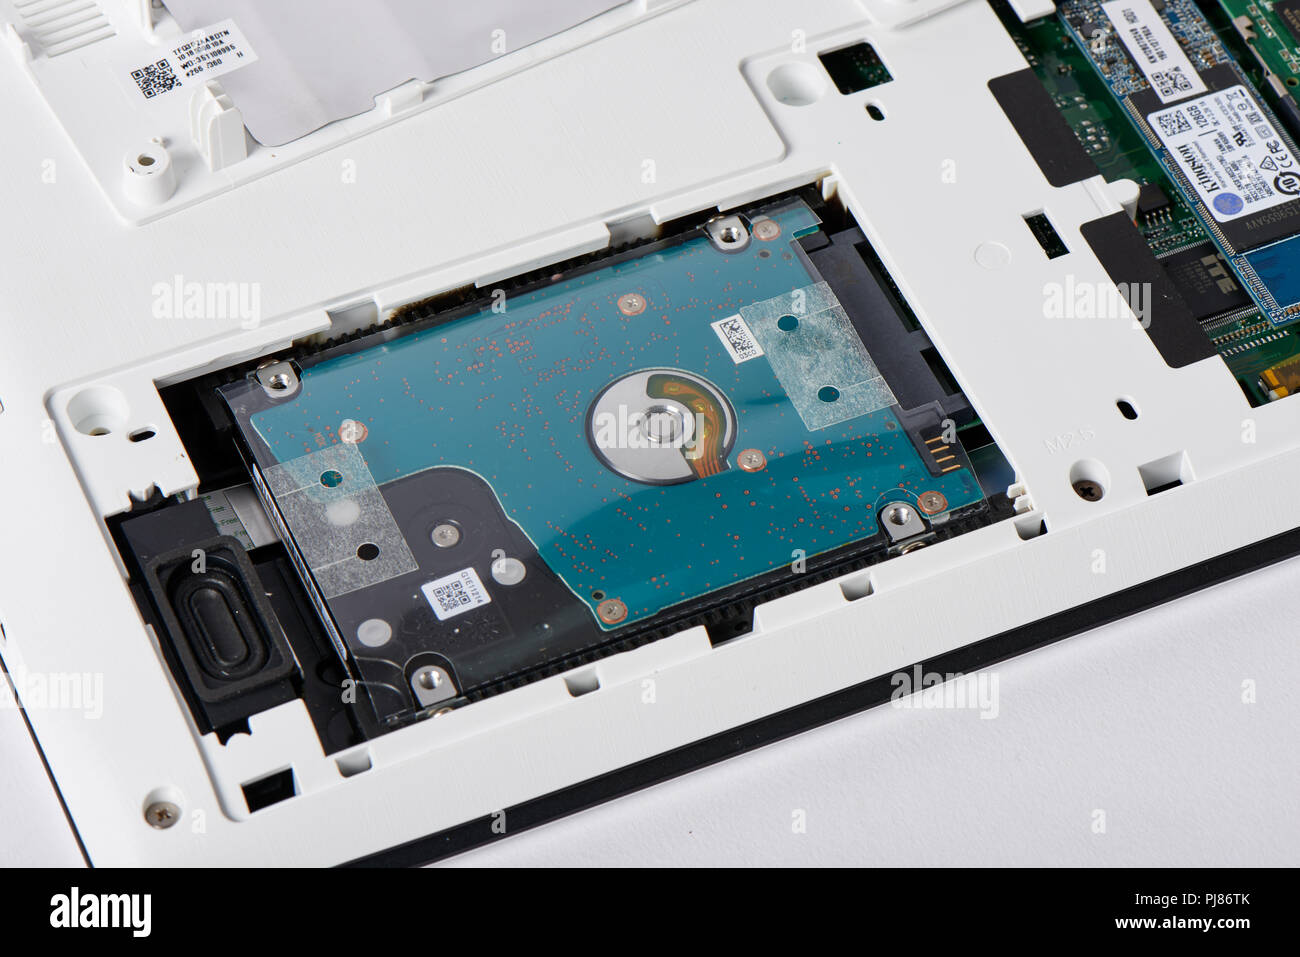 Gimpo-si, Korea - July 10, 2018: 2.5inch hard disk drive with aseembly bracket and SATA slot on the access panel of laptop computer for hardware upgra Stock Photo